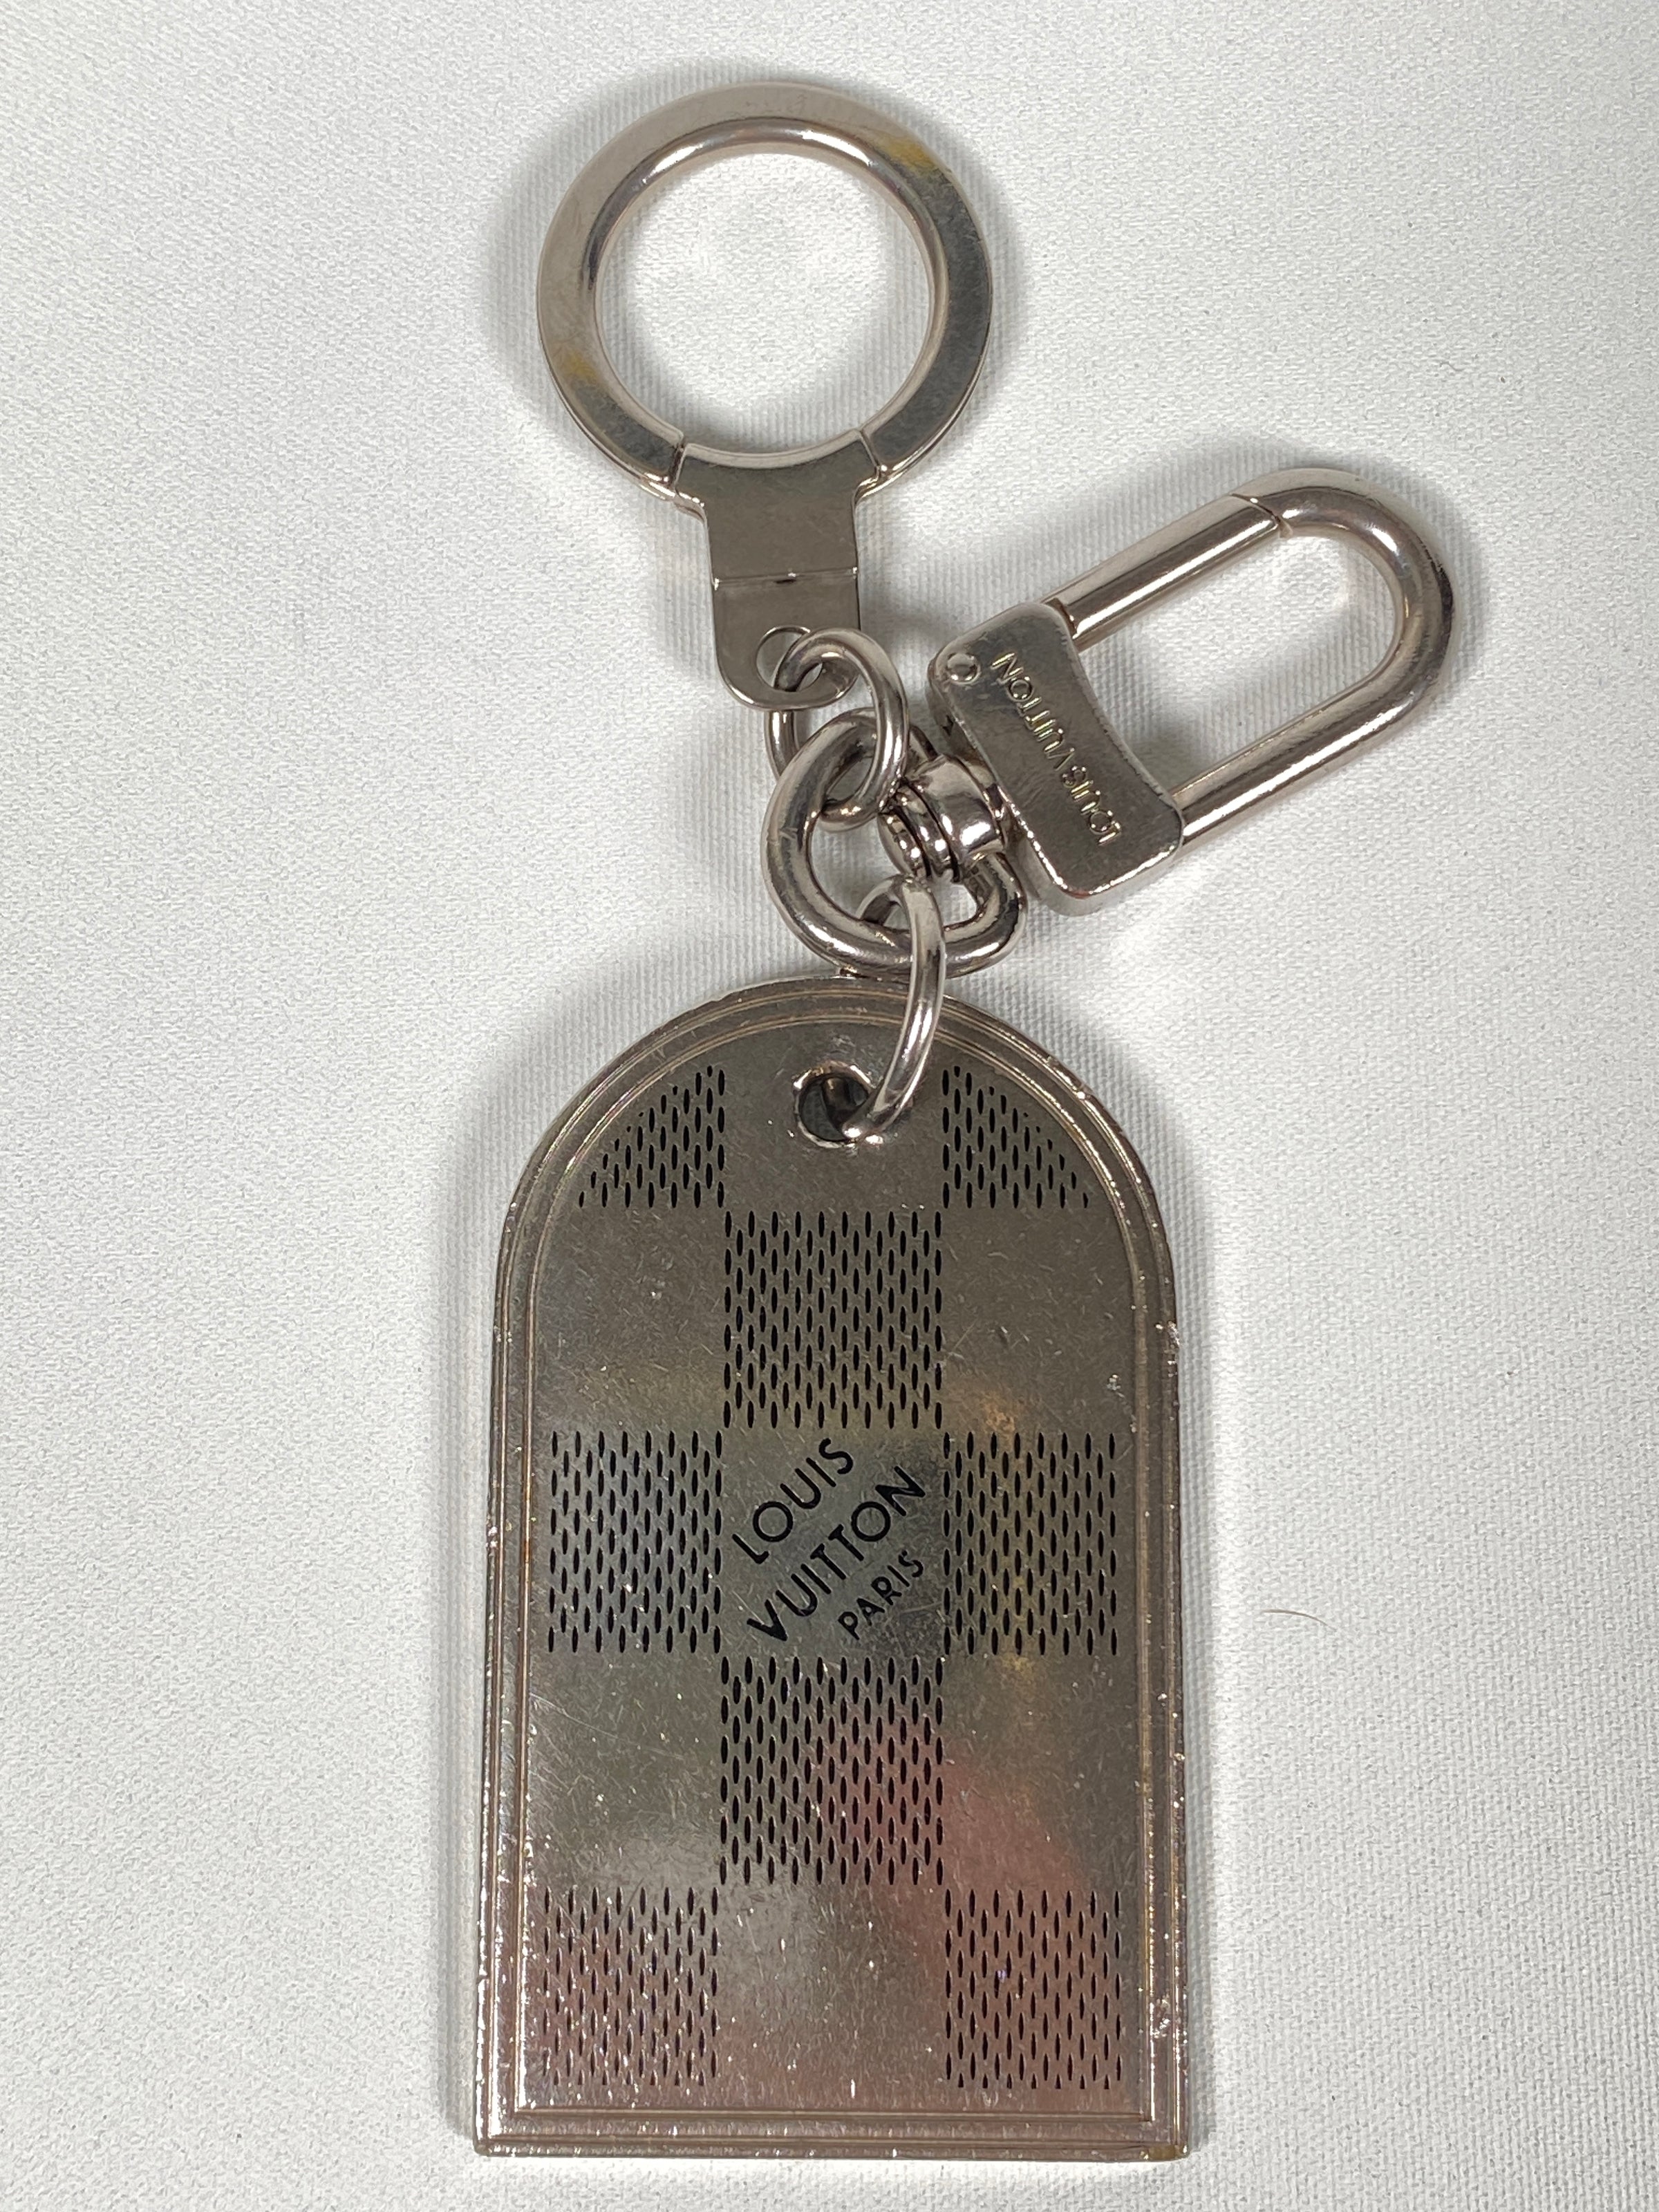 Louis Vuitton Silver Metal Luggage Tag Key Holder and Charm